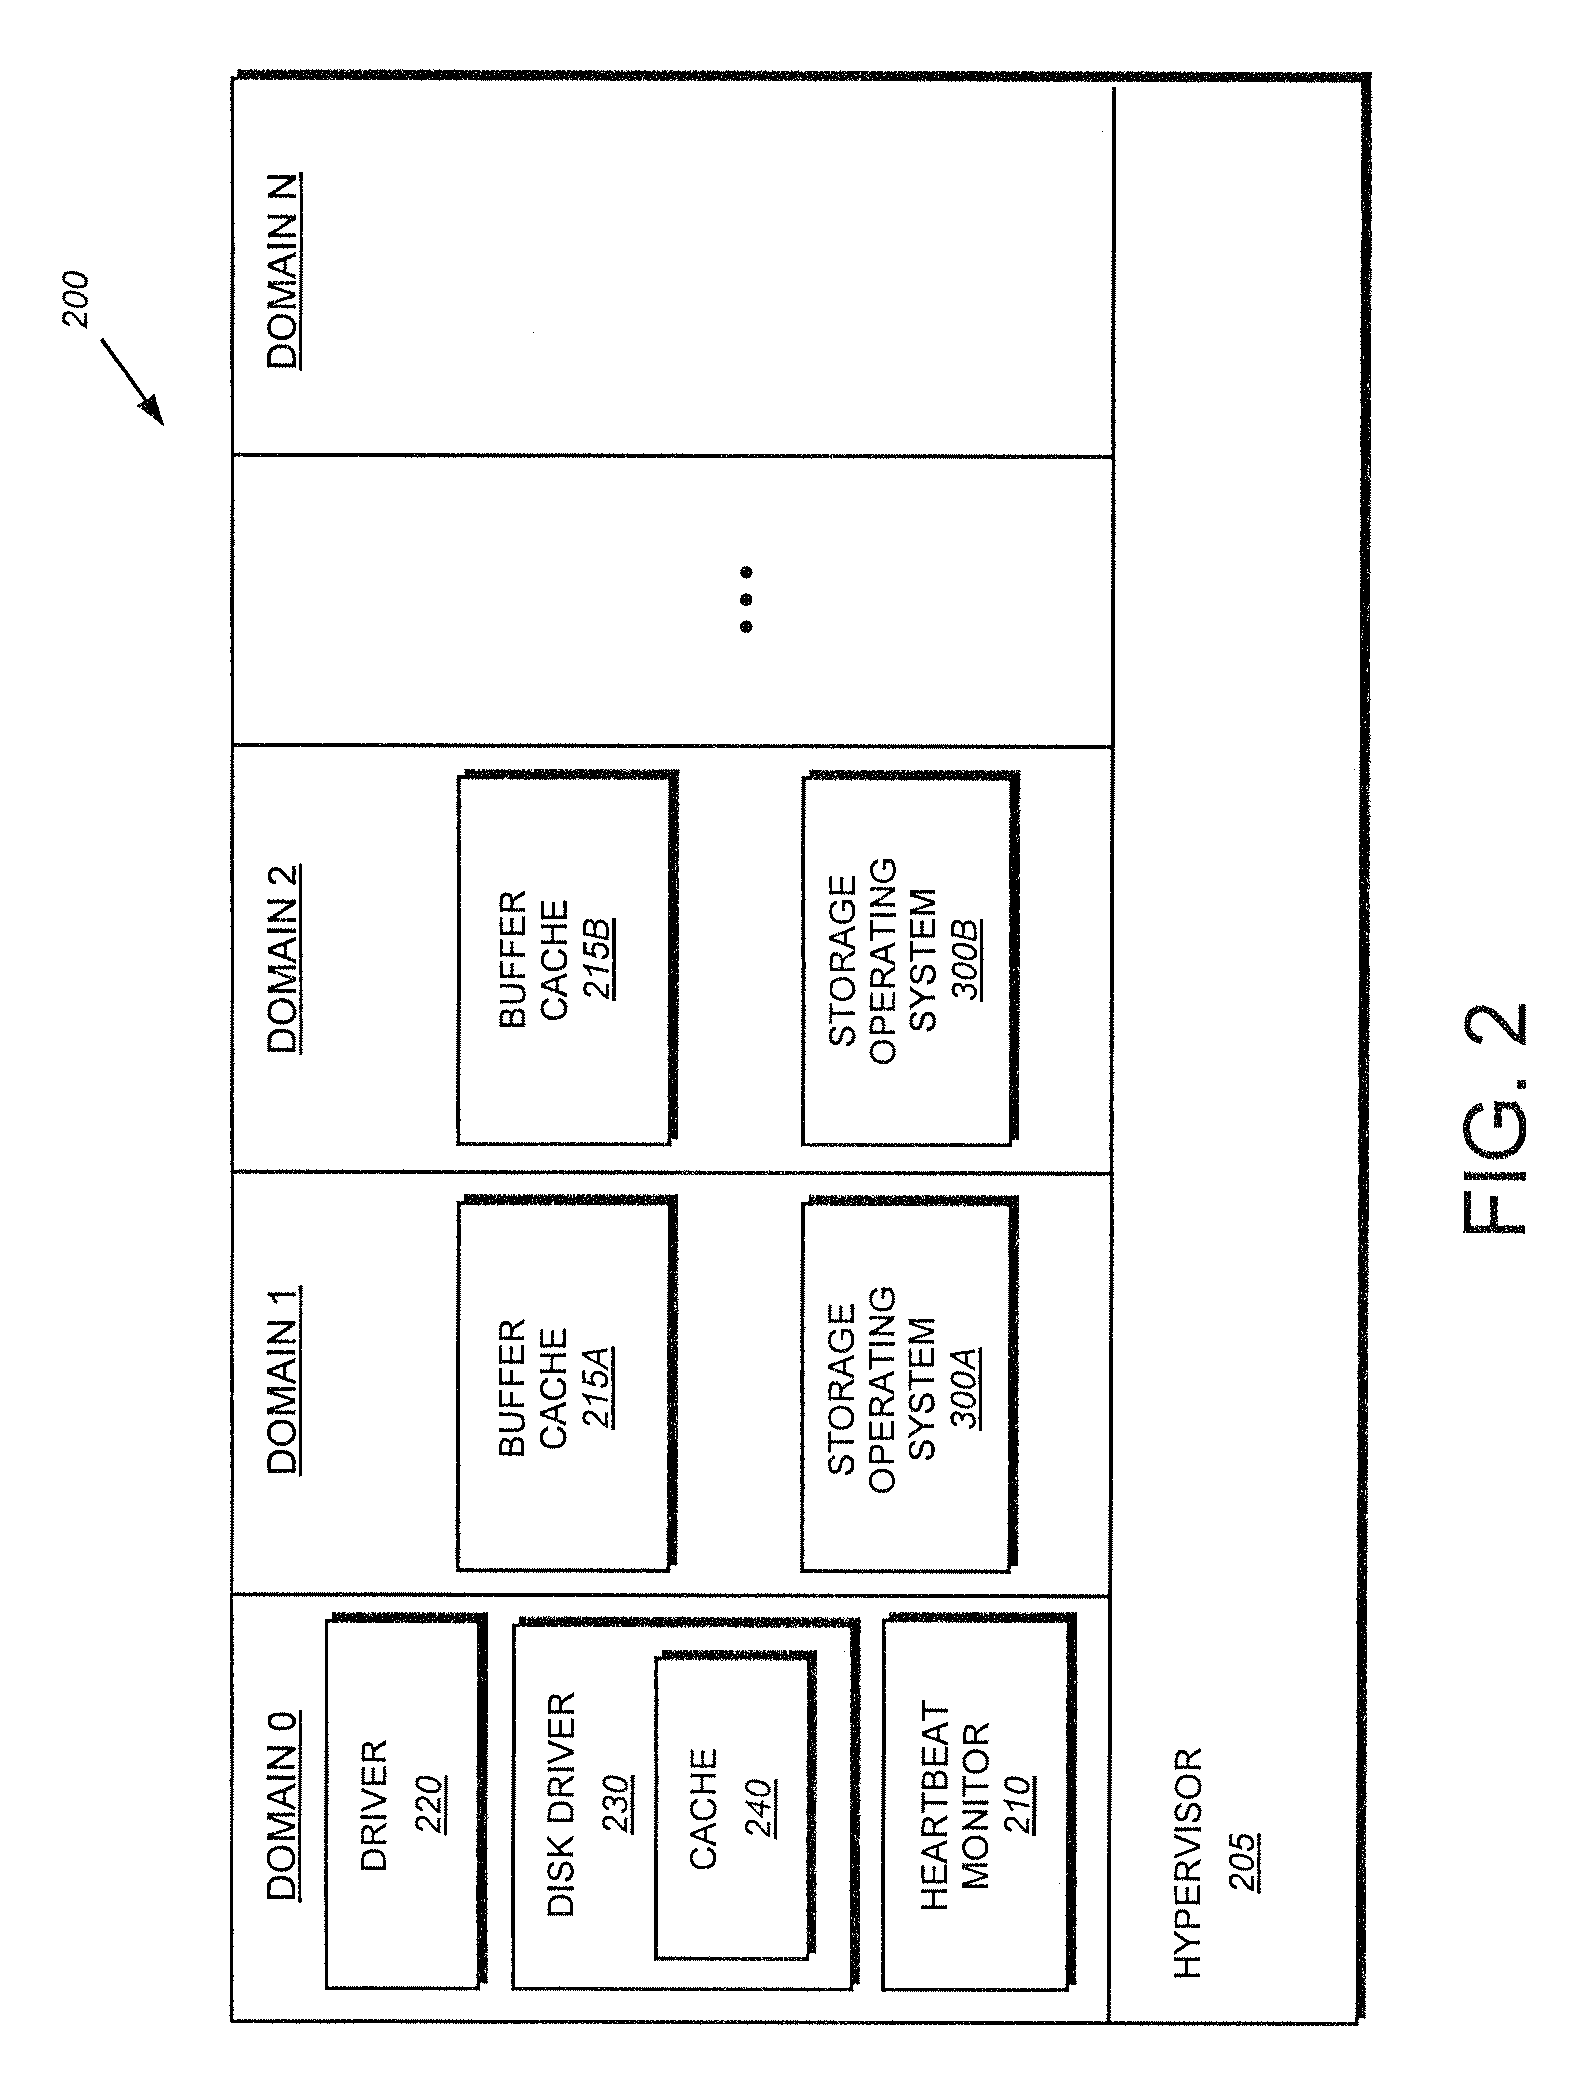 System and method for fast restart of a guest operating system in a virtual machine environment